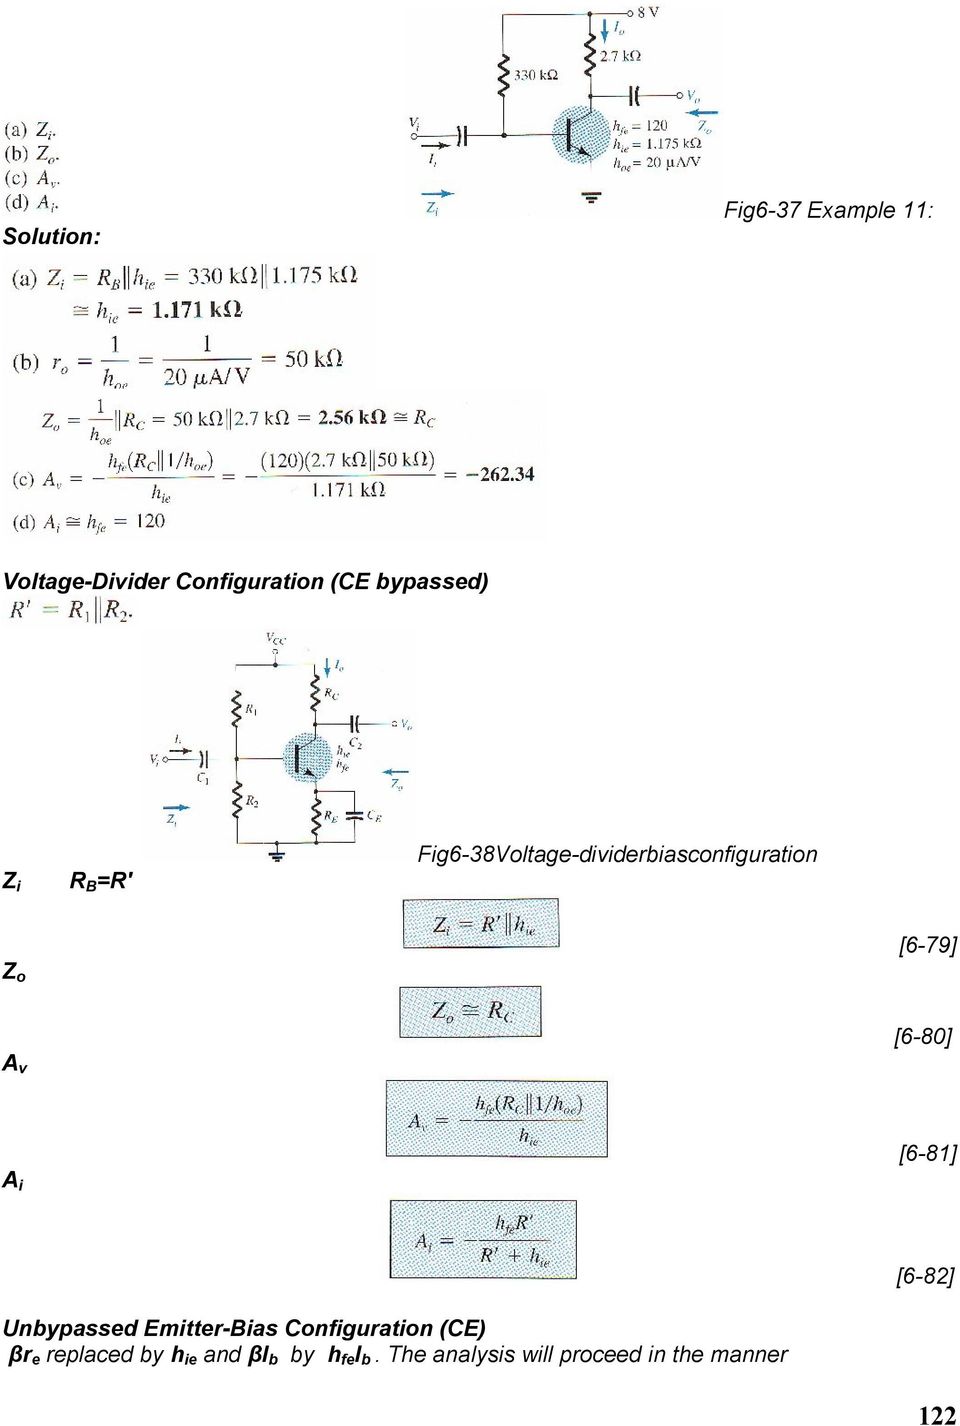 A i [6-81] [6-82] Unbypassed Emitter-Bias Configuration (CE) βr e